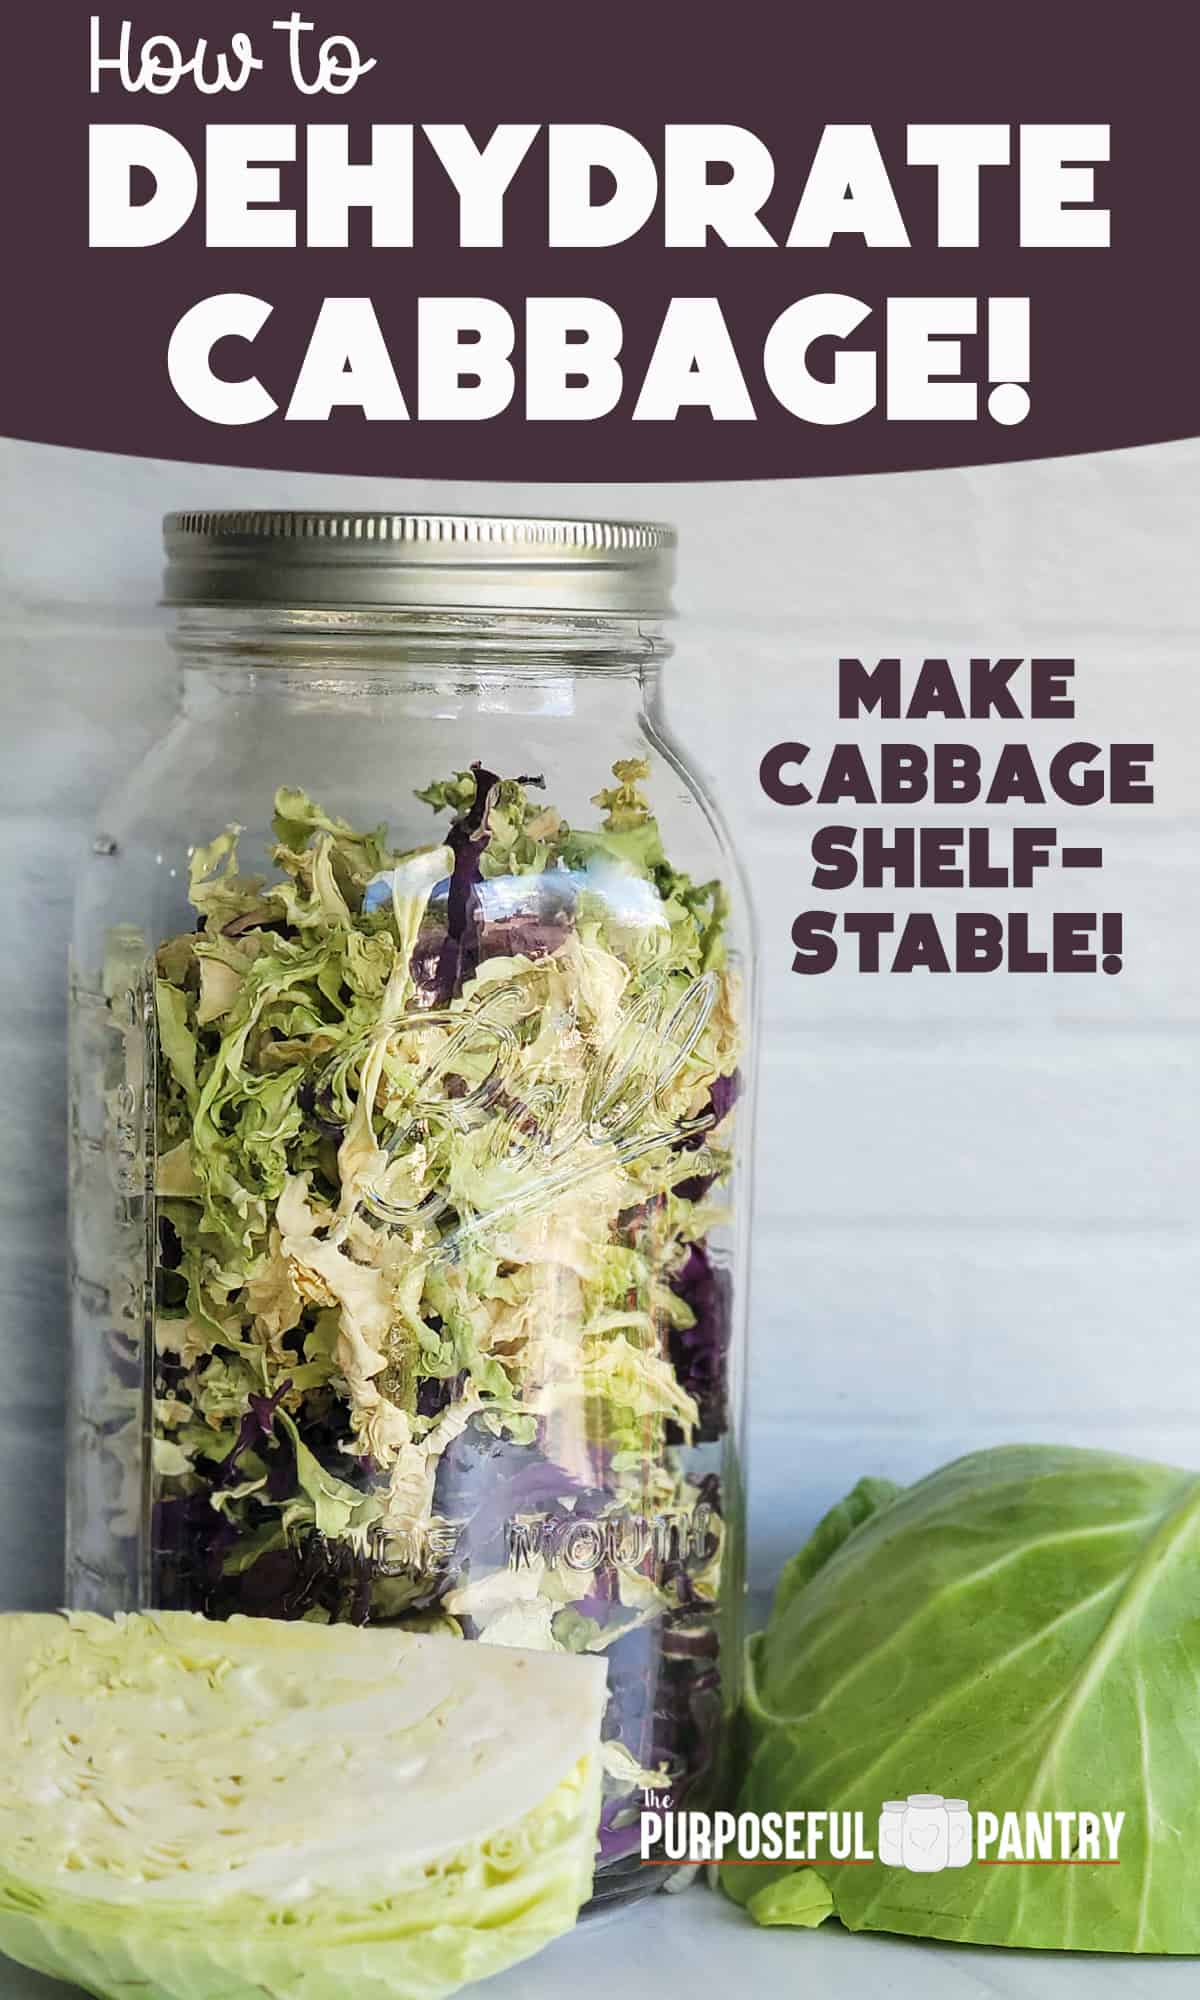 Dehydrated cabbage in a jar with fresh cut cabbage in the foreground